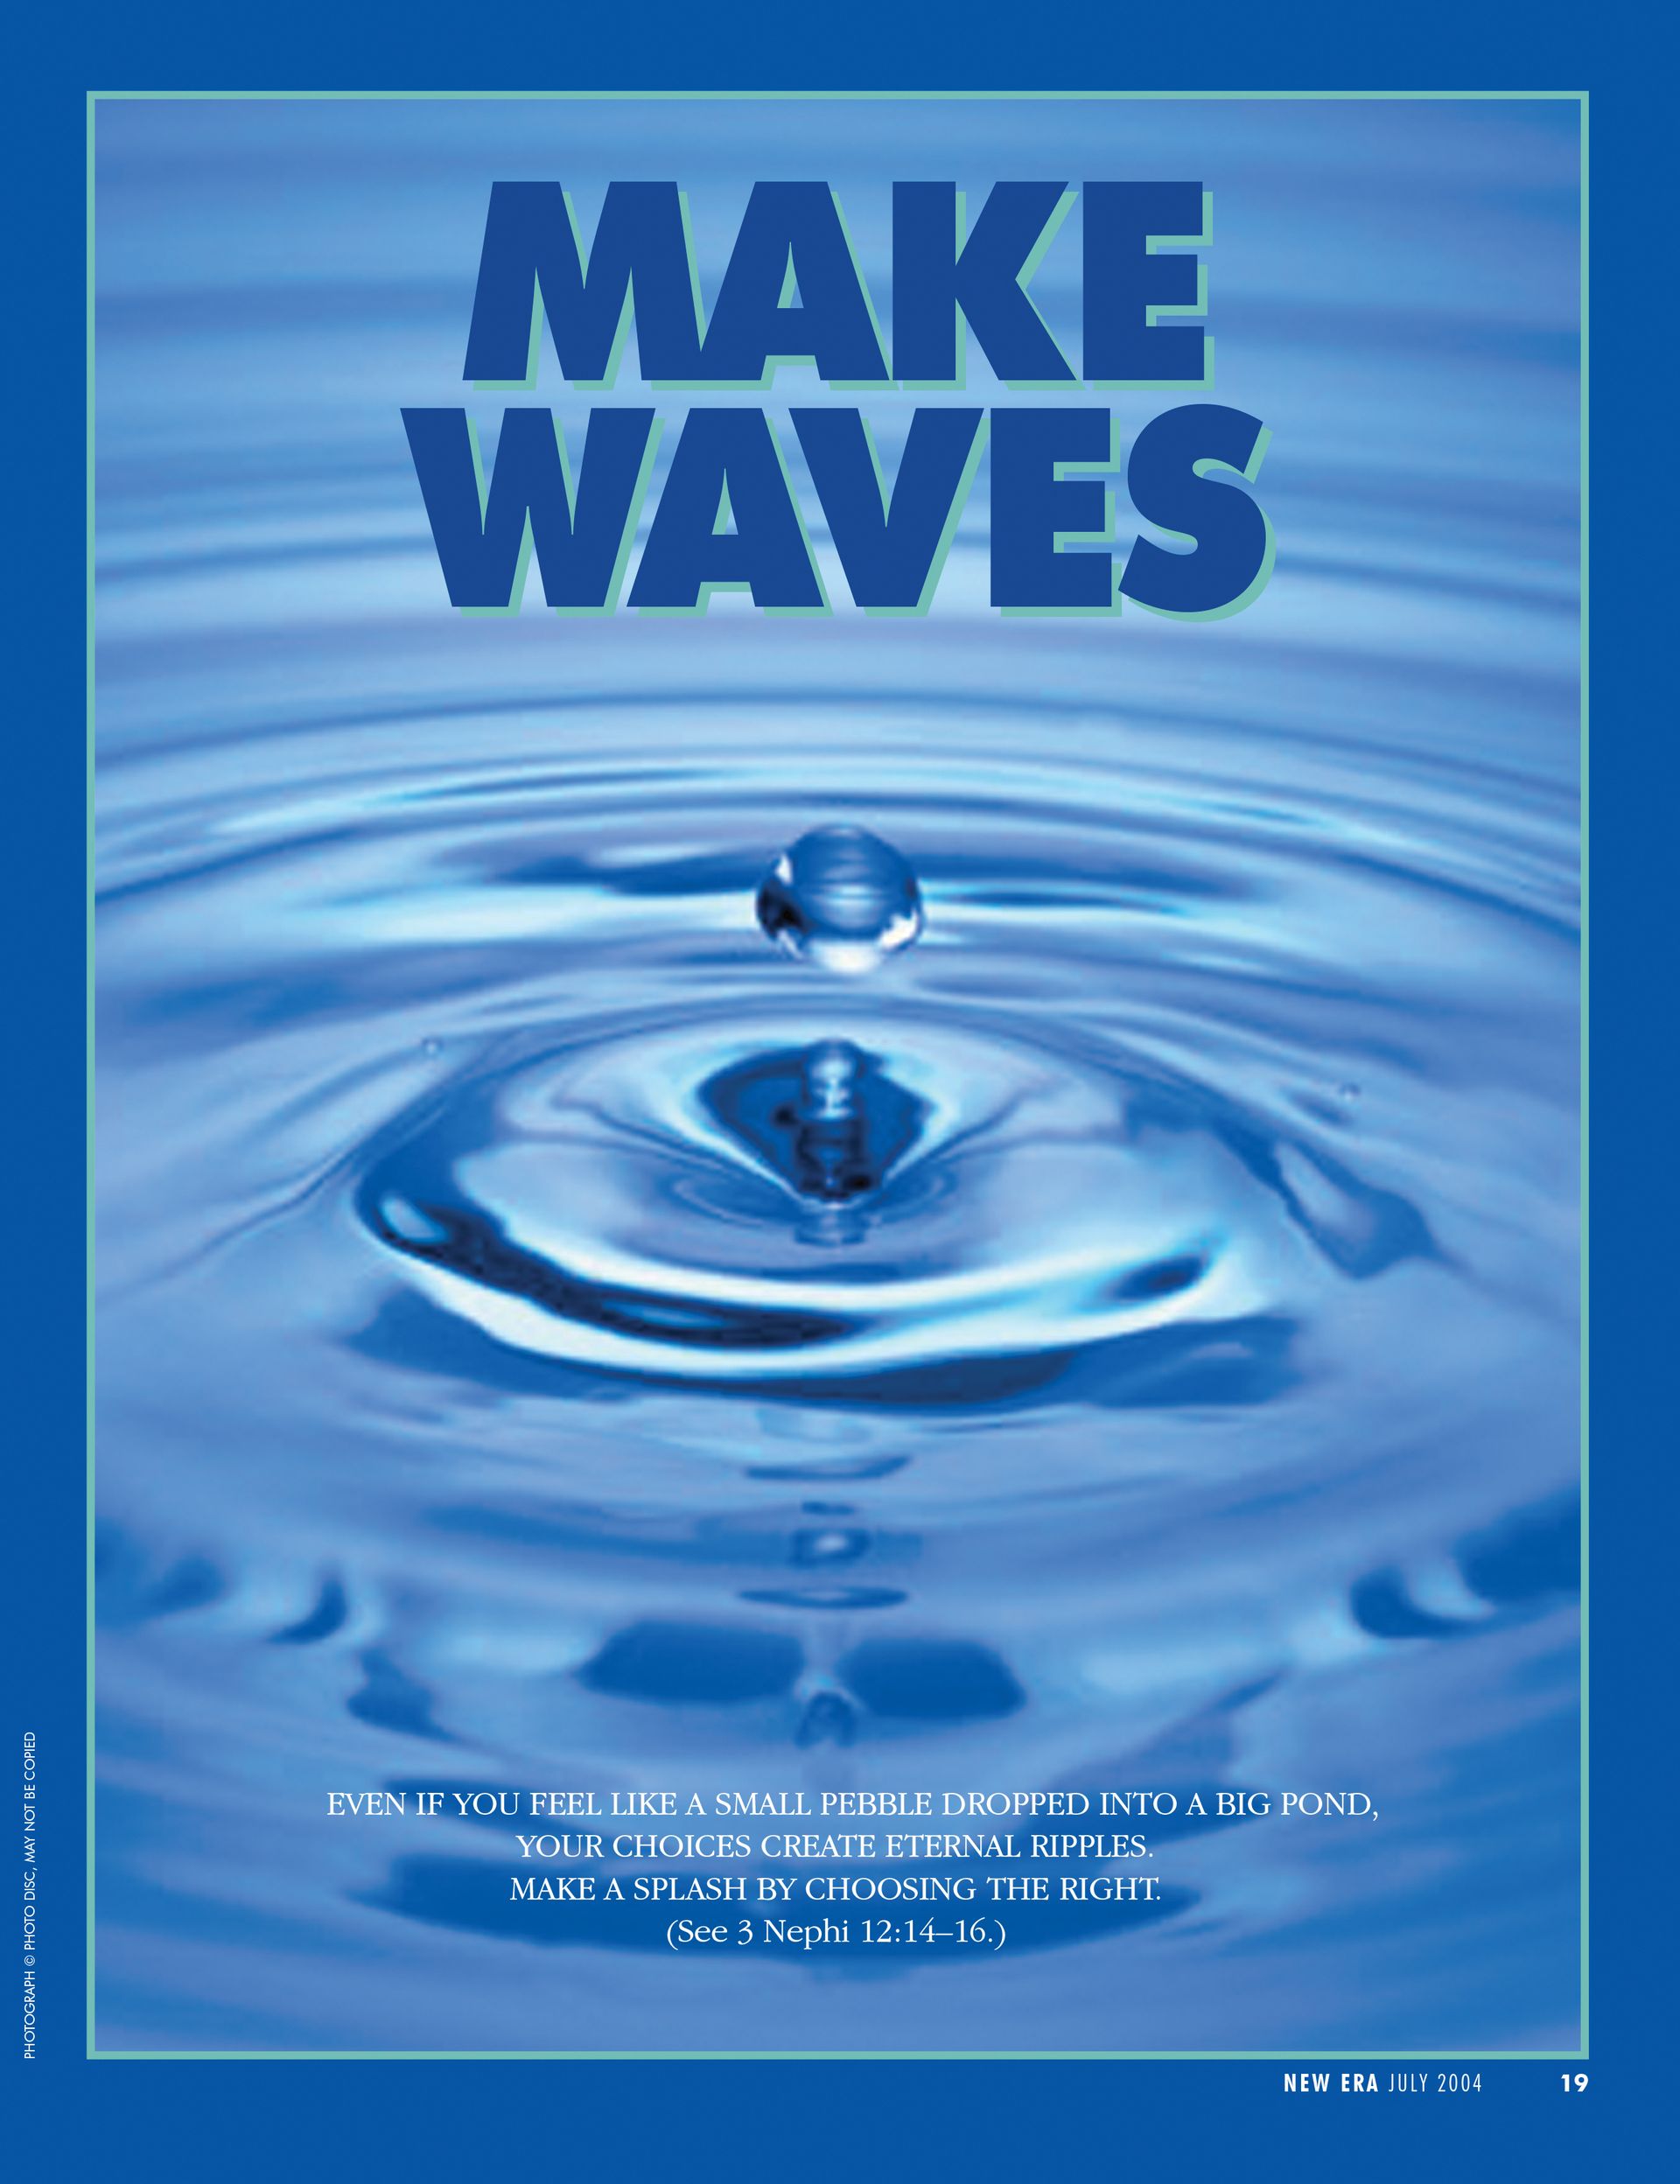 Make Waves. Even if you feel like a small pebble dropped into a big pond, your choices create eternal ripples. Make a splash by choosing the right. (See 3 Nephi 12:14–16.) July 2004 © undefined ipCode 1.